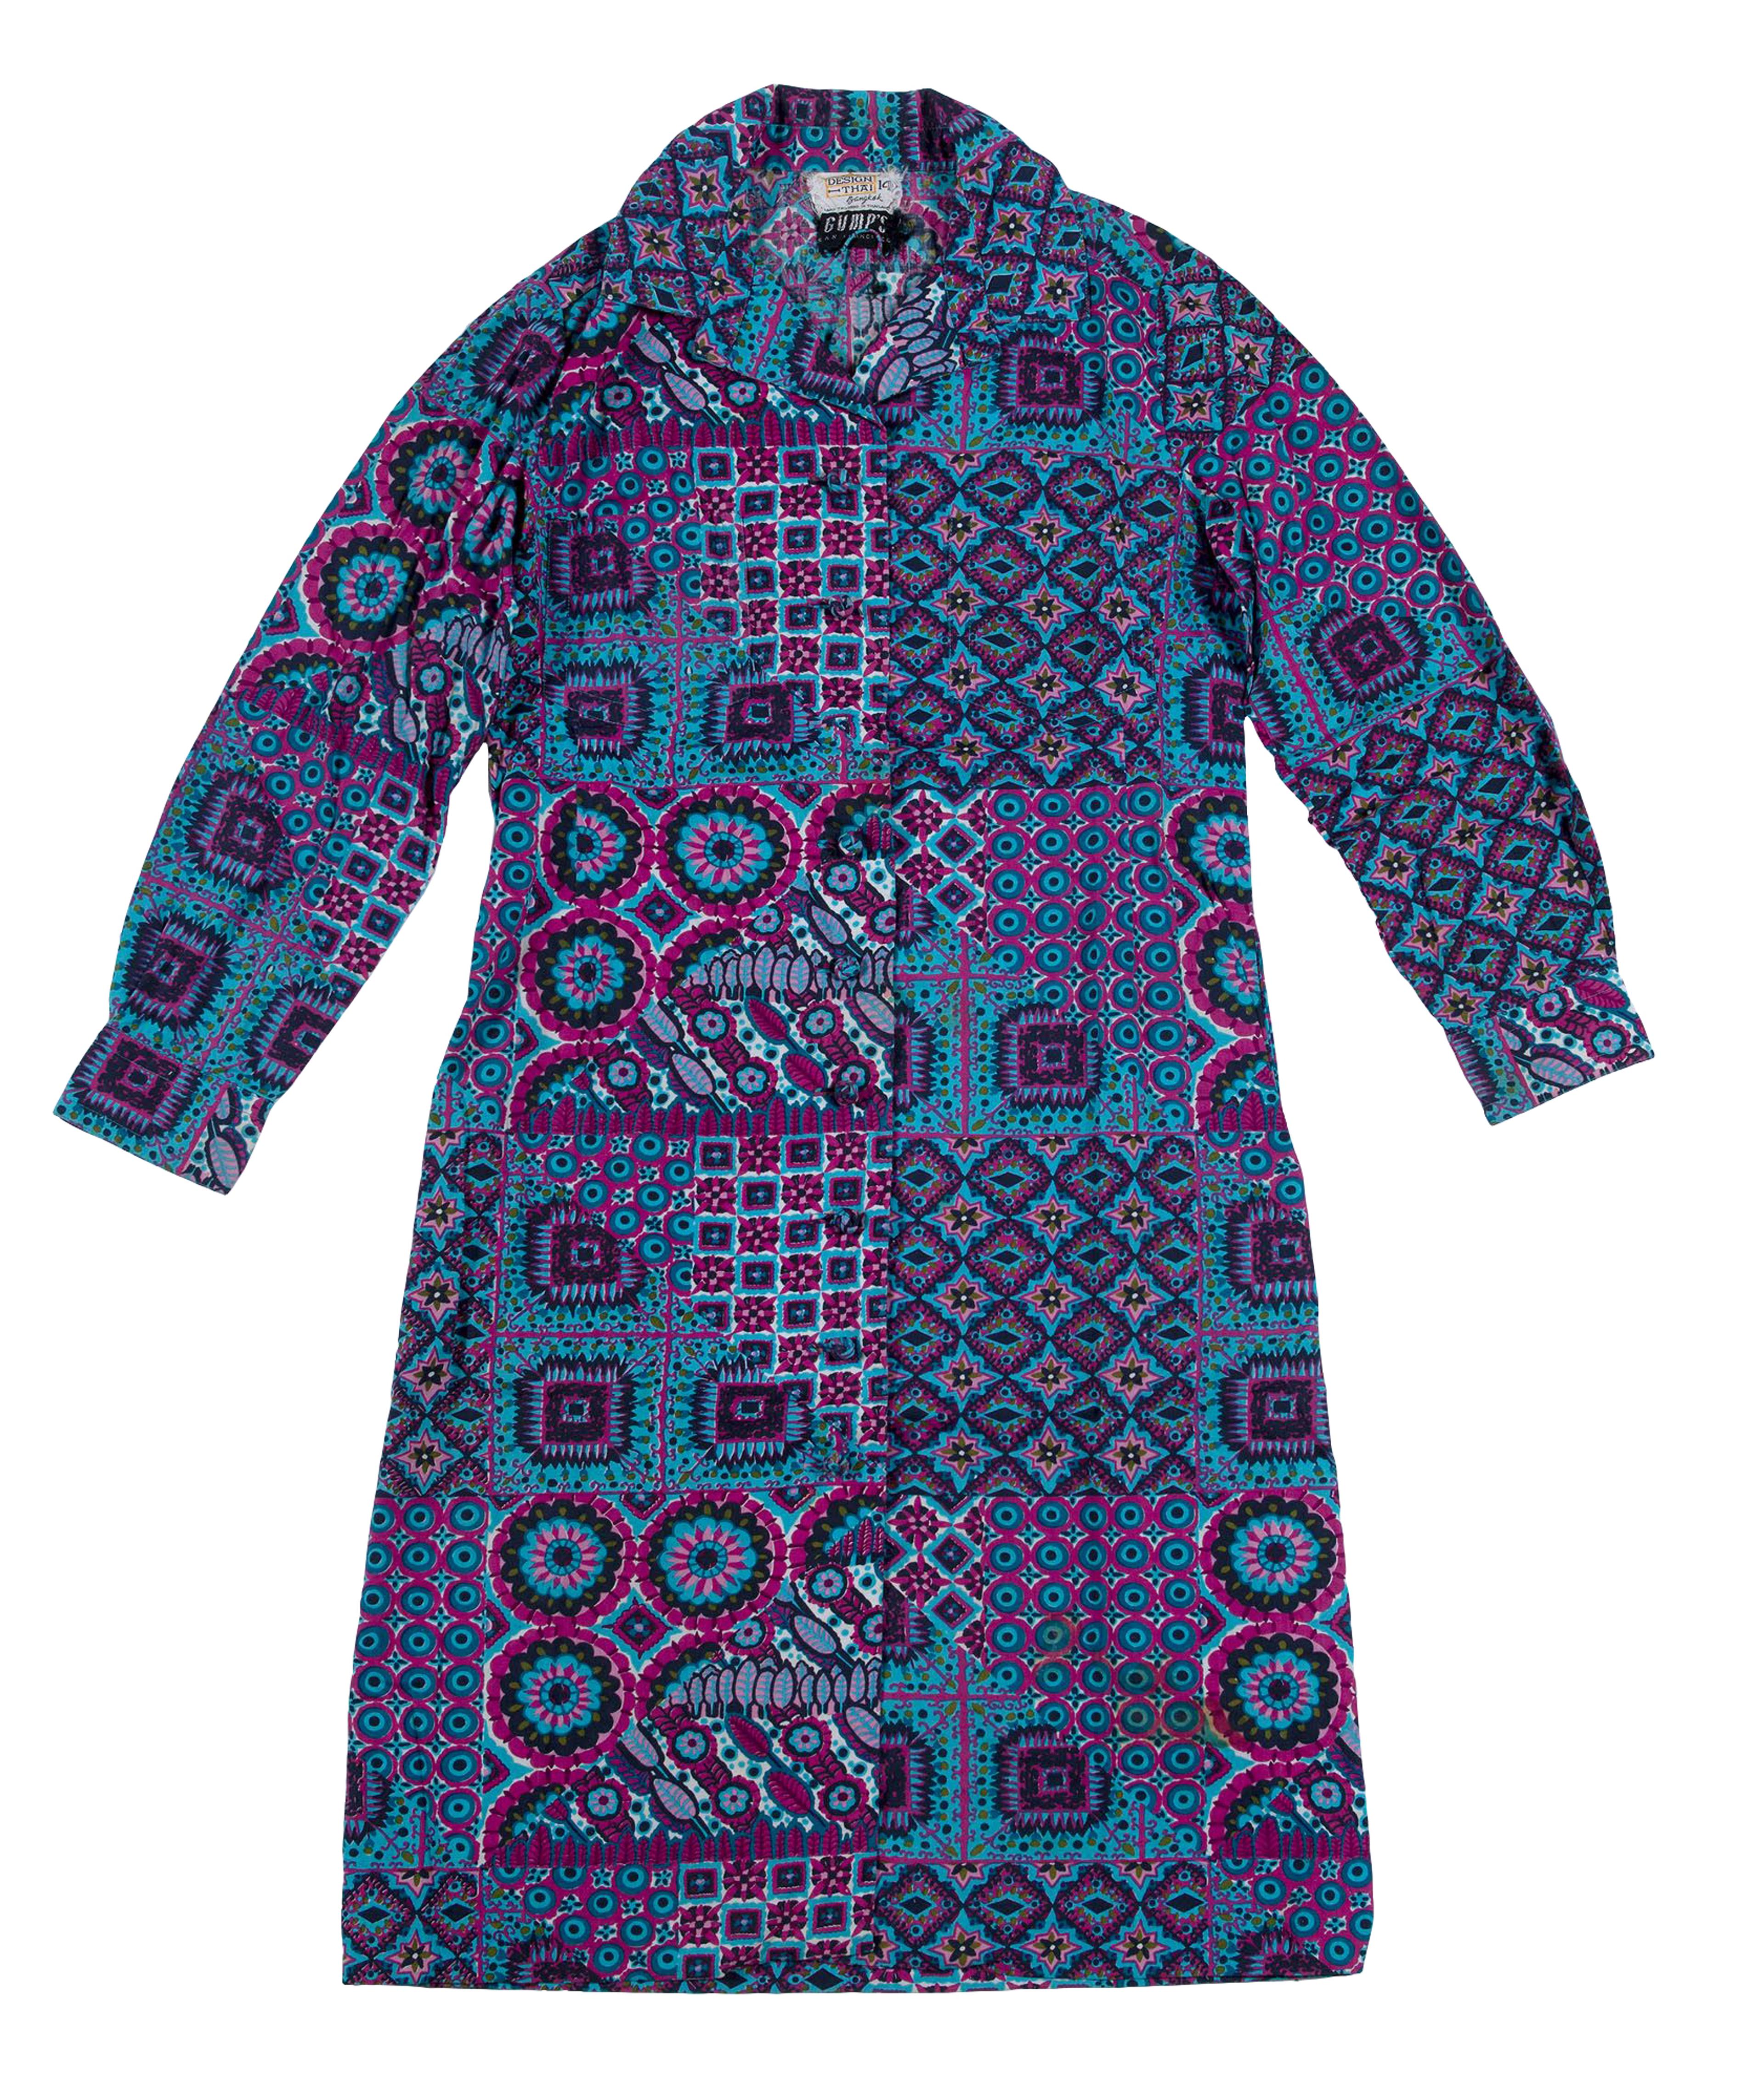 Blue and purple patterned dress